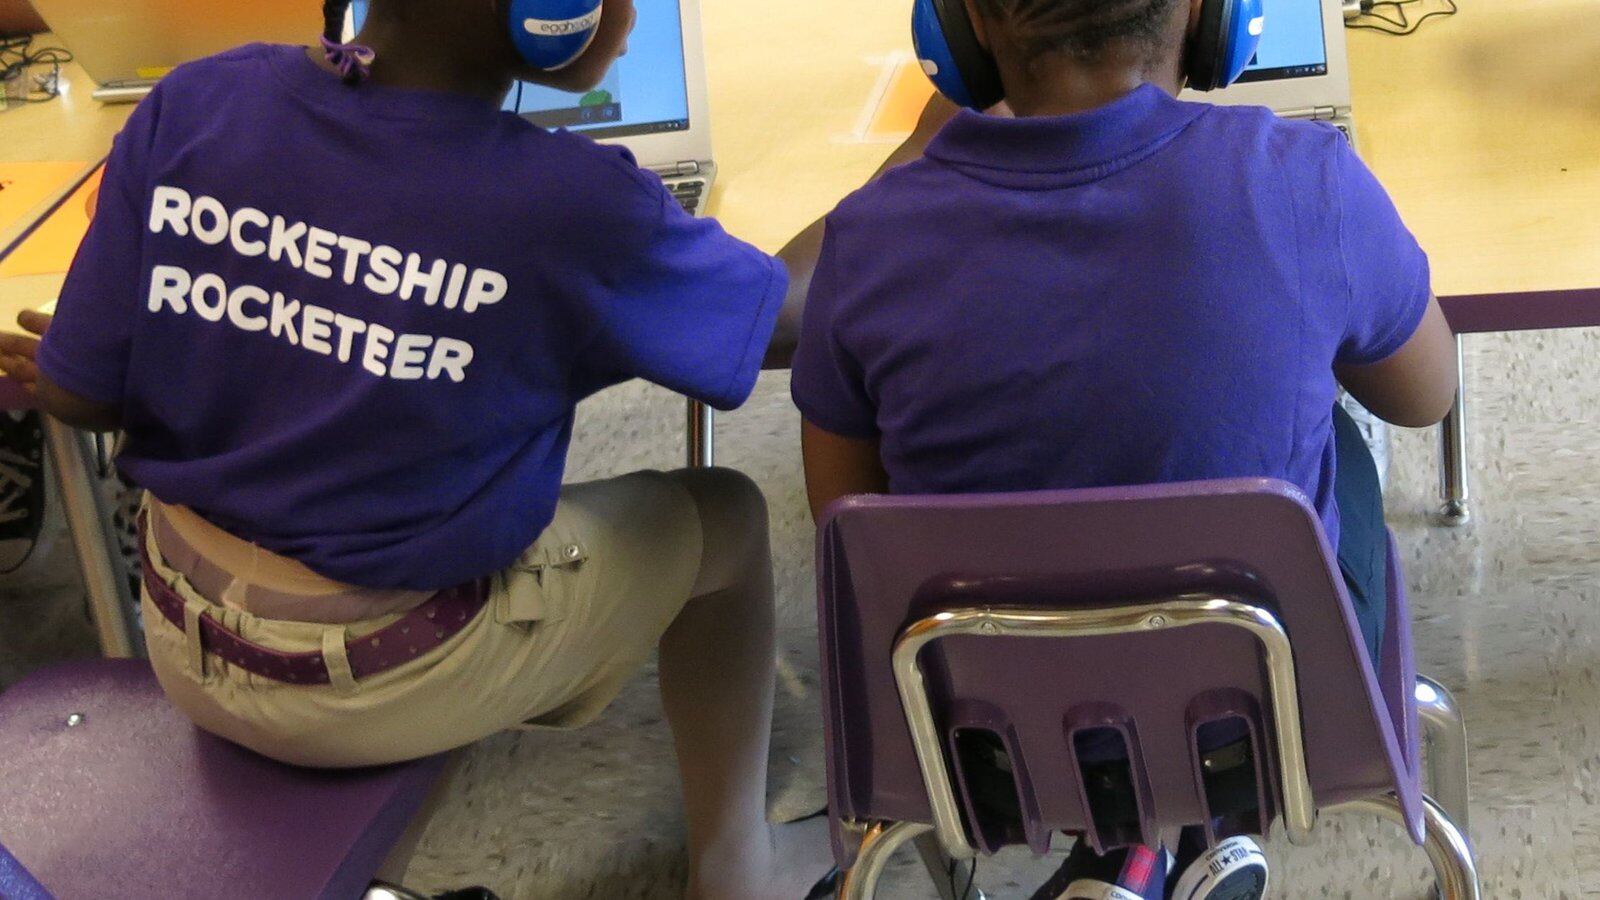 Students help each other in the learning lab at Rocketship Nashville Education.